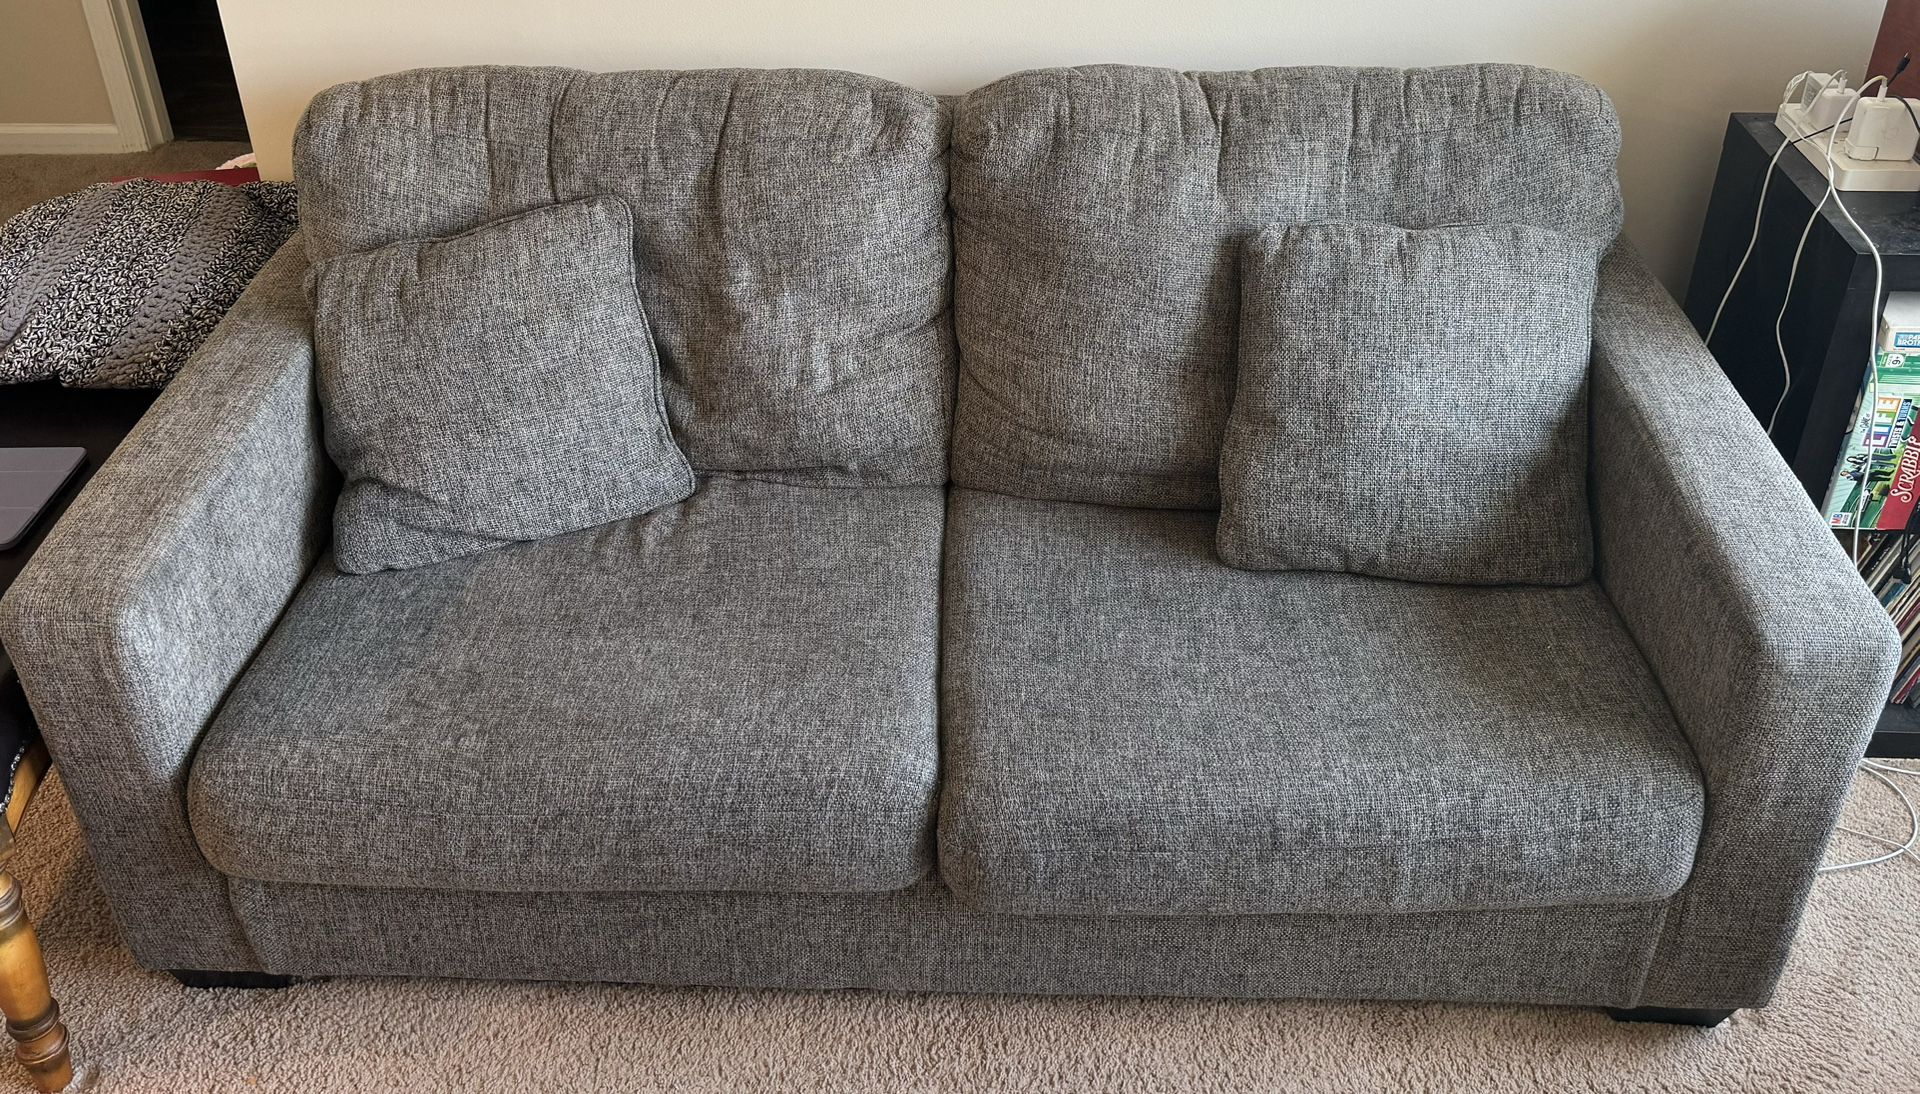 Two Gray Couches with Four Pillows